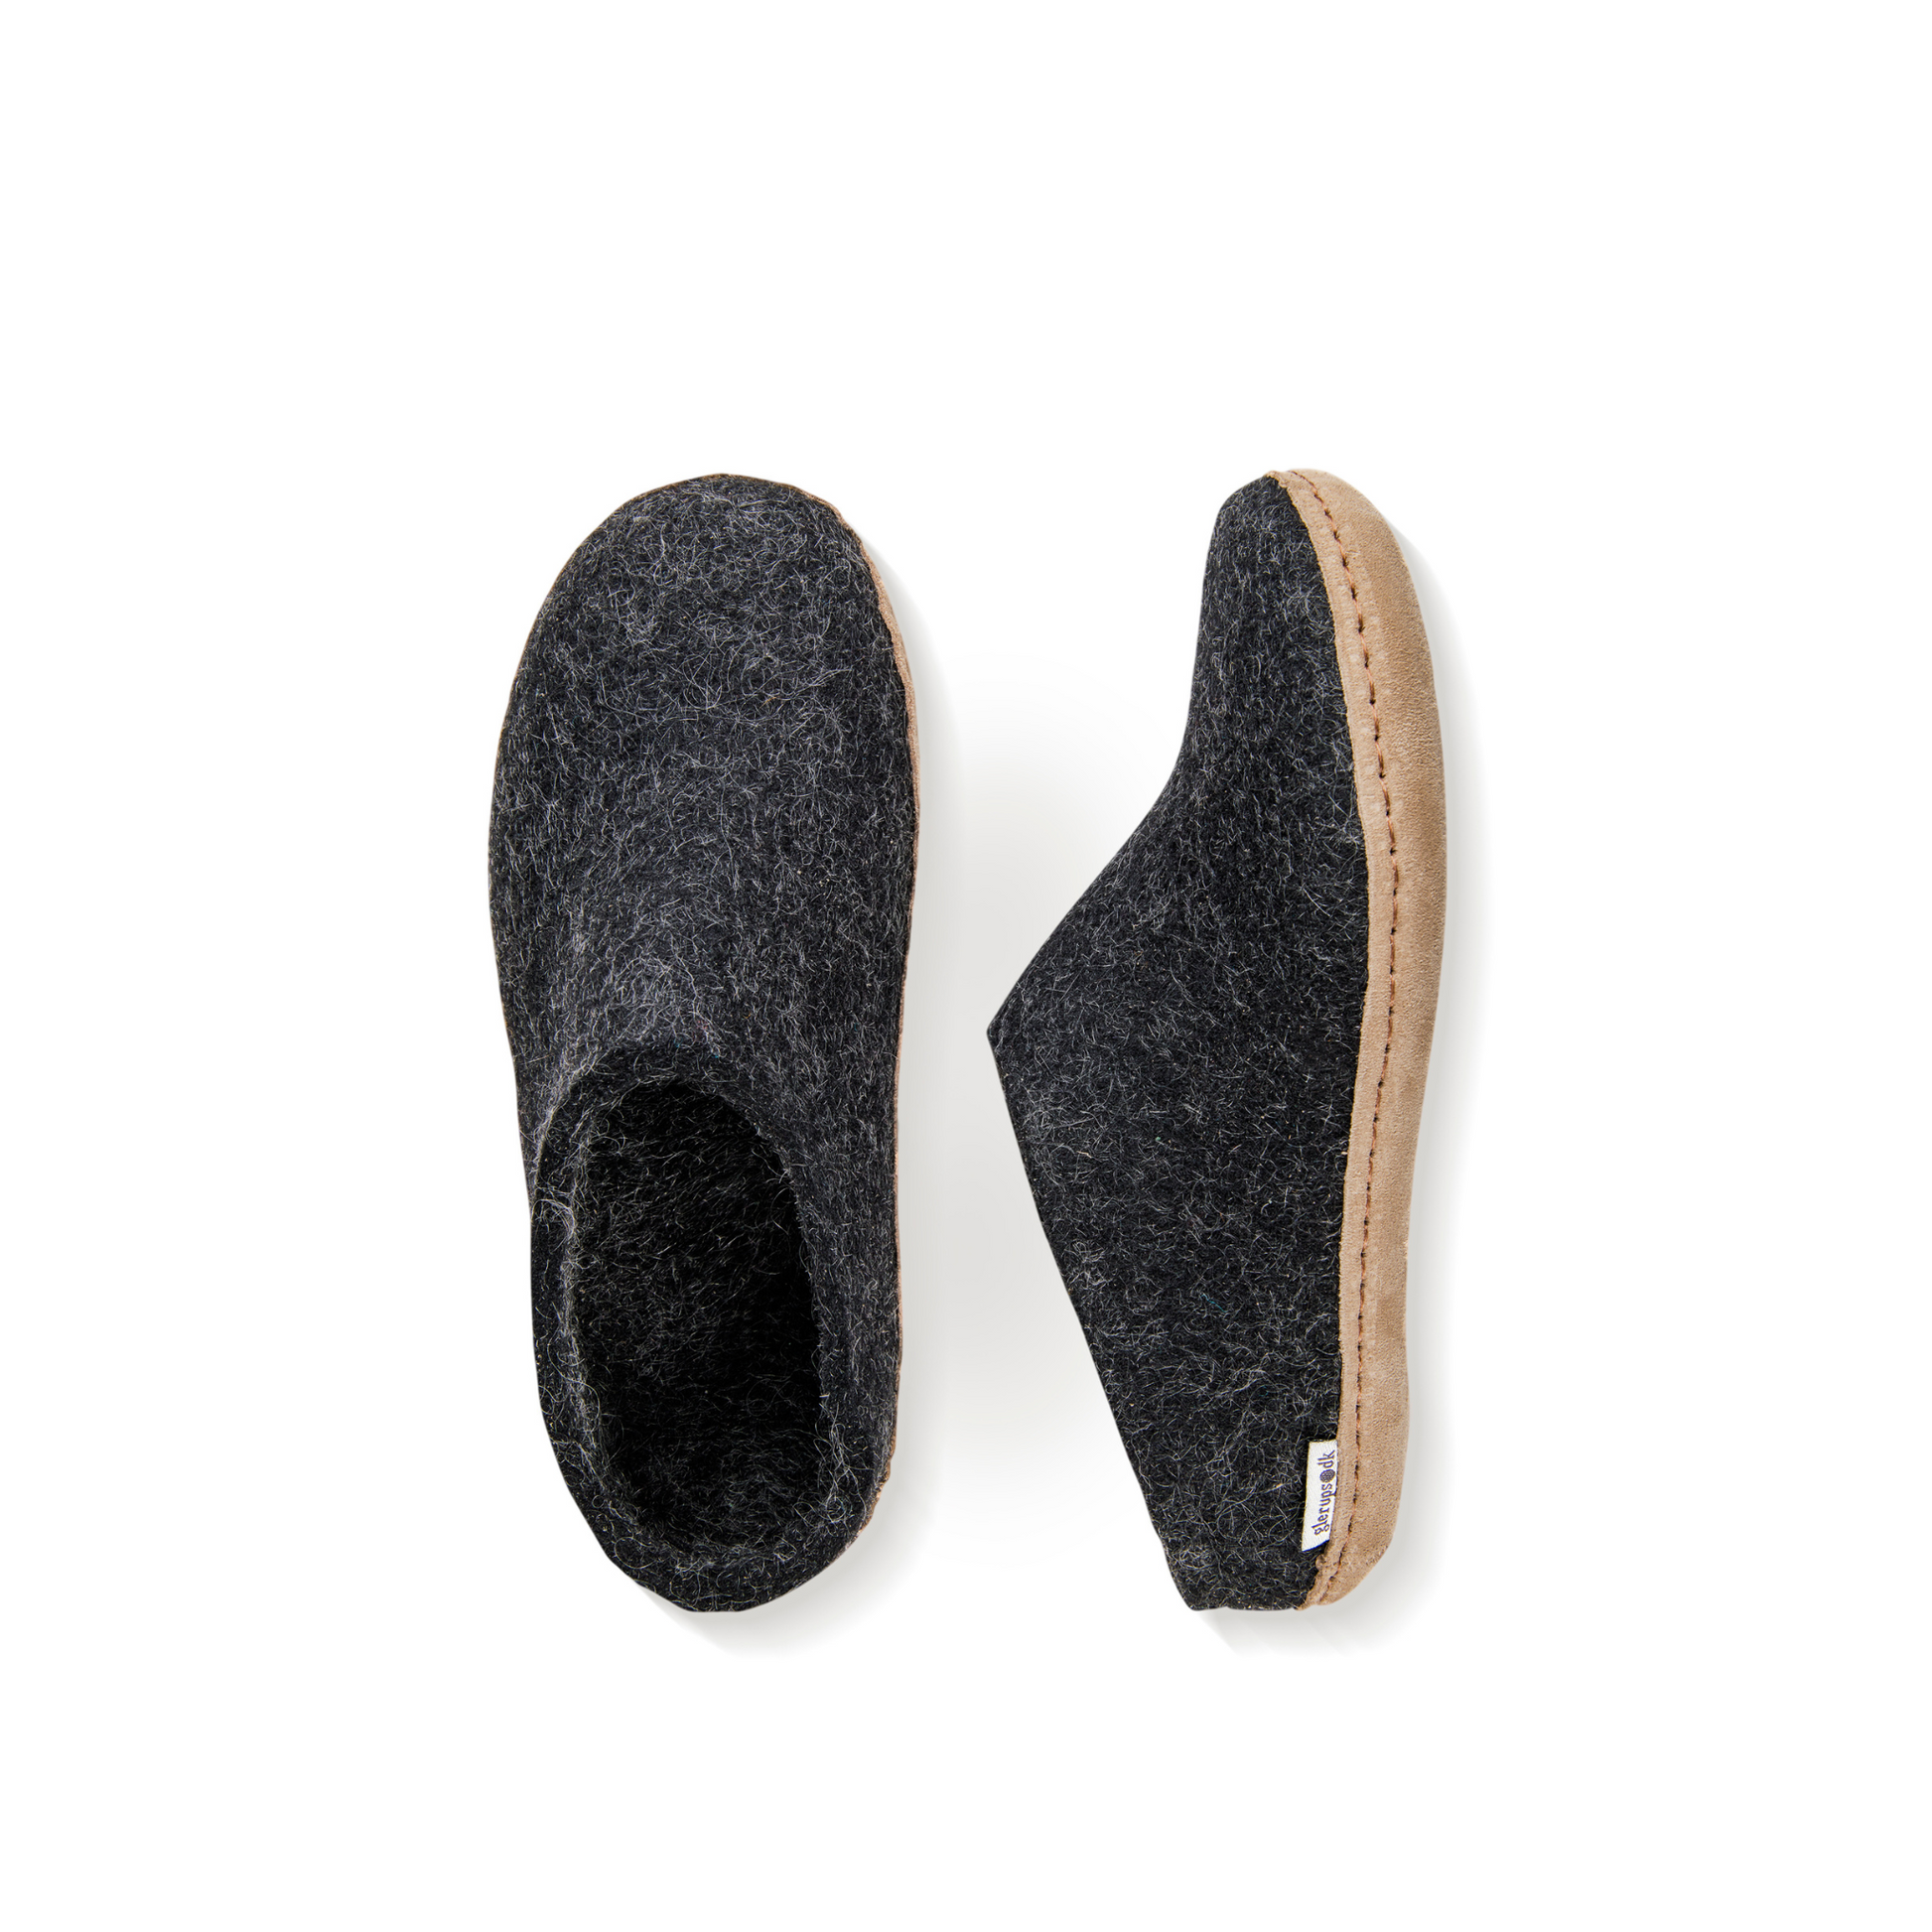 An overhead view of two dark grey felted wool slippers. One is pictured straight on, showing the top face of the slipper, while the other lays on its side, showing the profile with tan leather sole with a row of stitching.